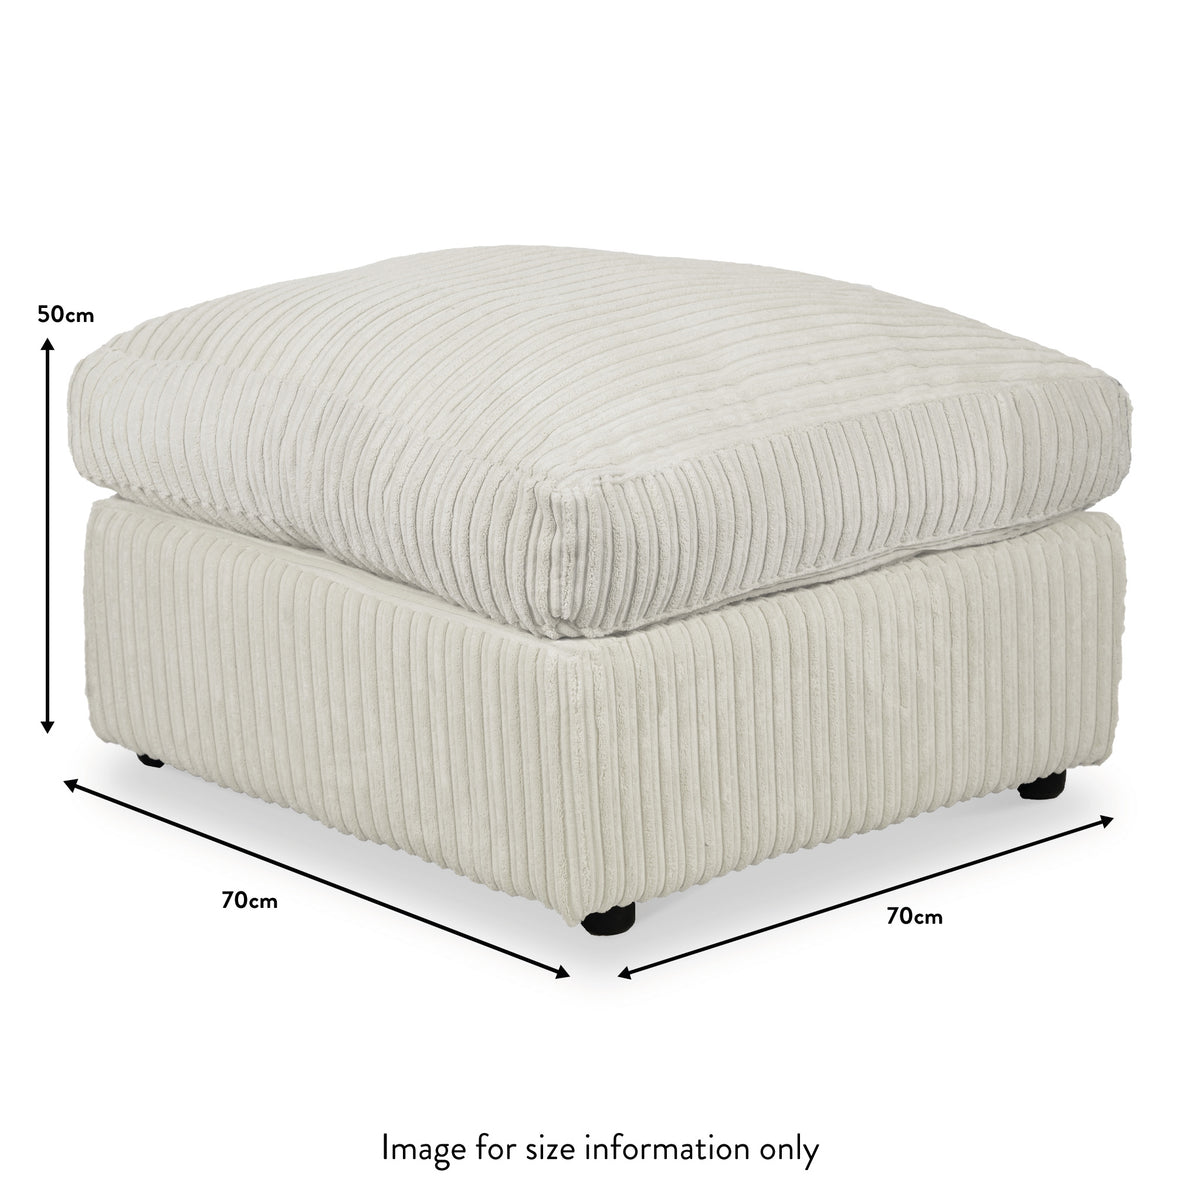 Bletchley Cream Jumbo Cord Footstool dimensions